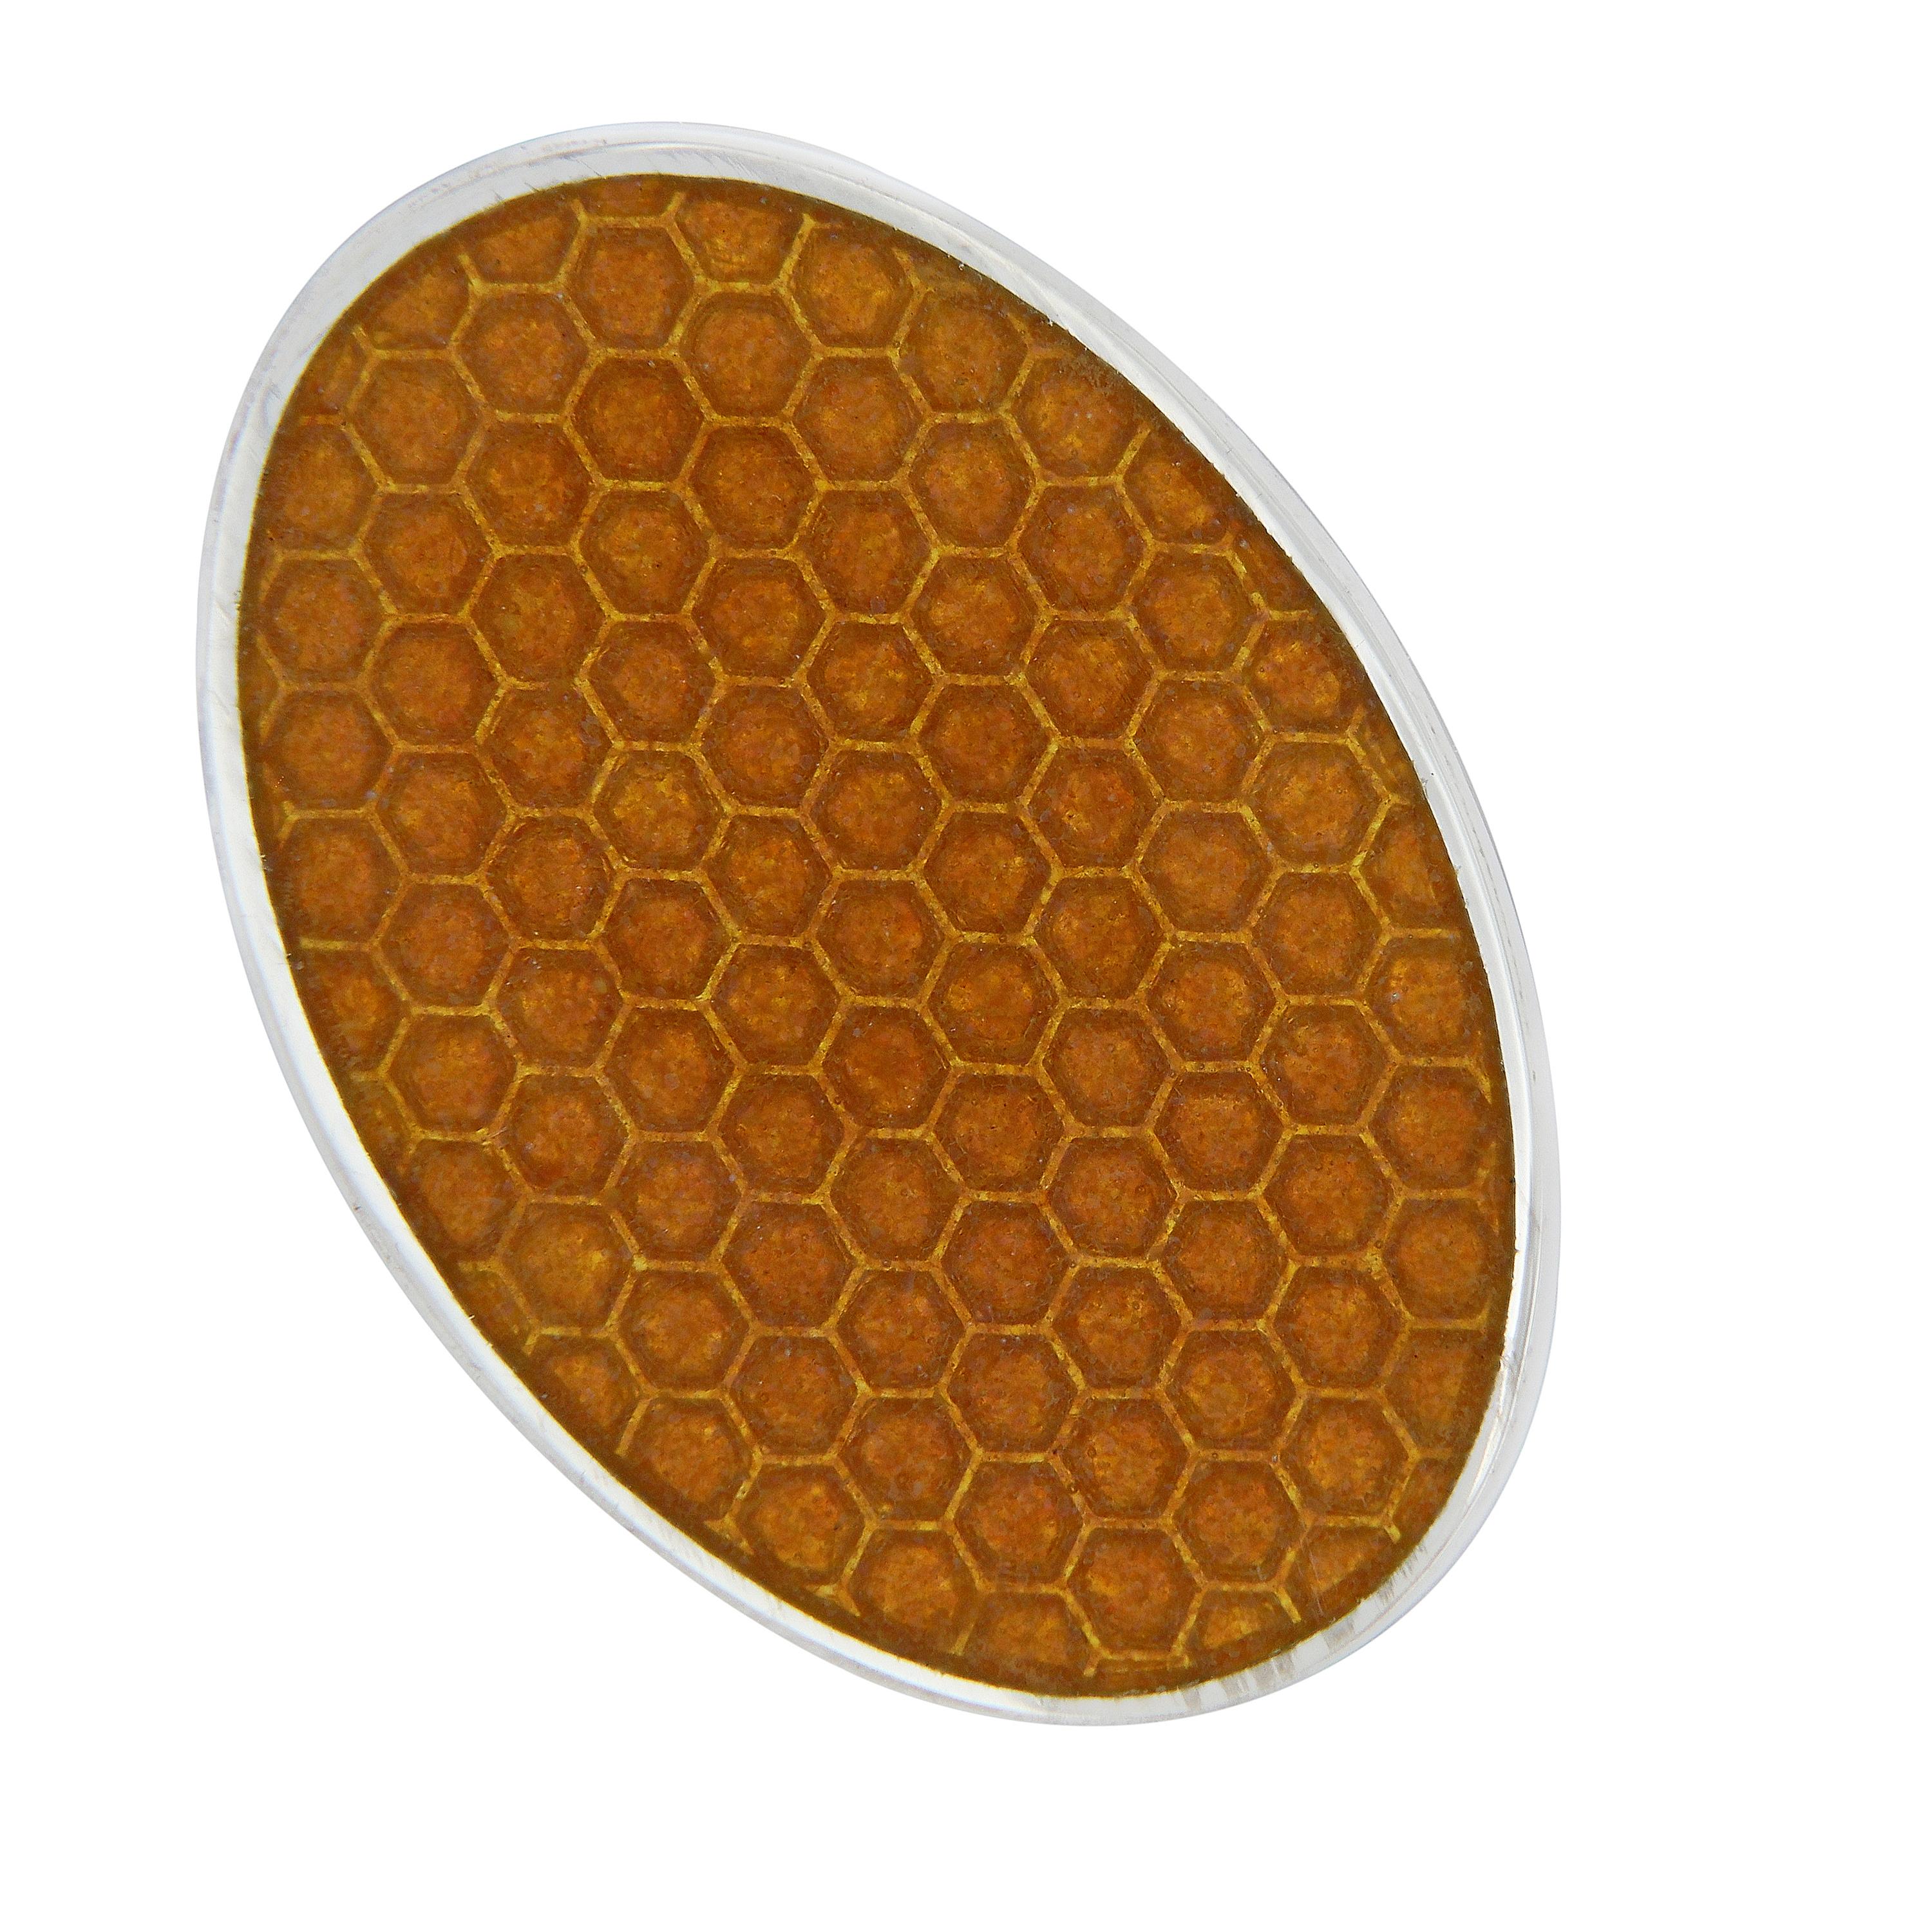 Beautiful Guilloche enamel honeycomb design cufflinks. Handmade in England for Campanelli & Pear. Weighs 12.6 grams. Oval measures 14mm x 19mm.